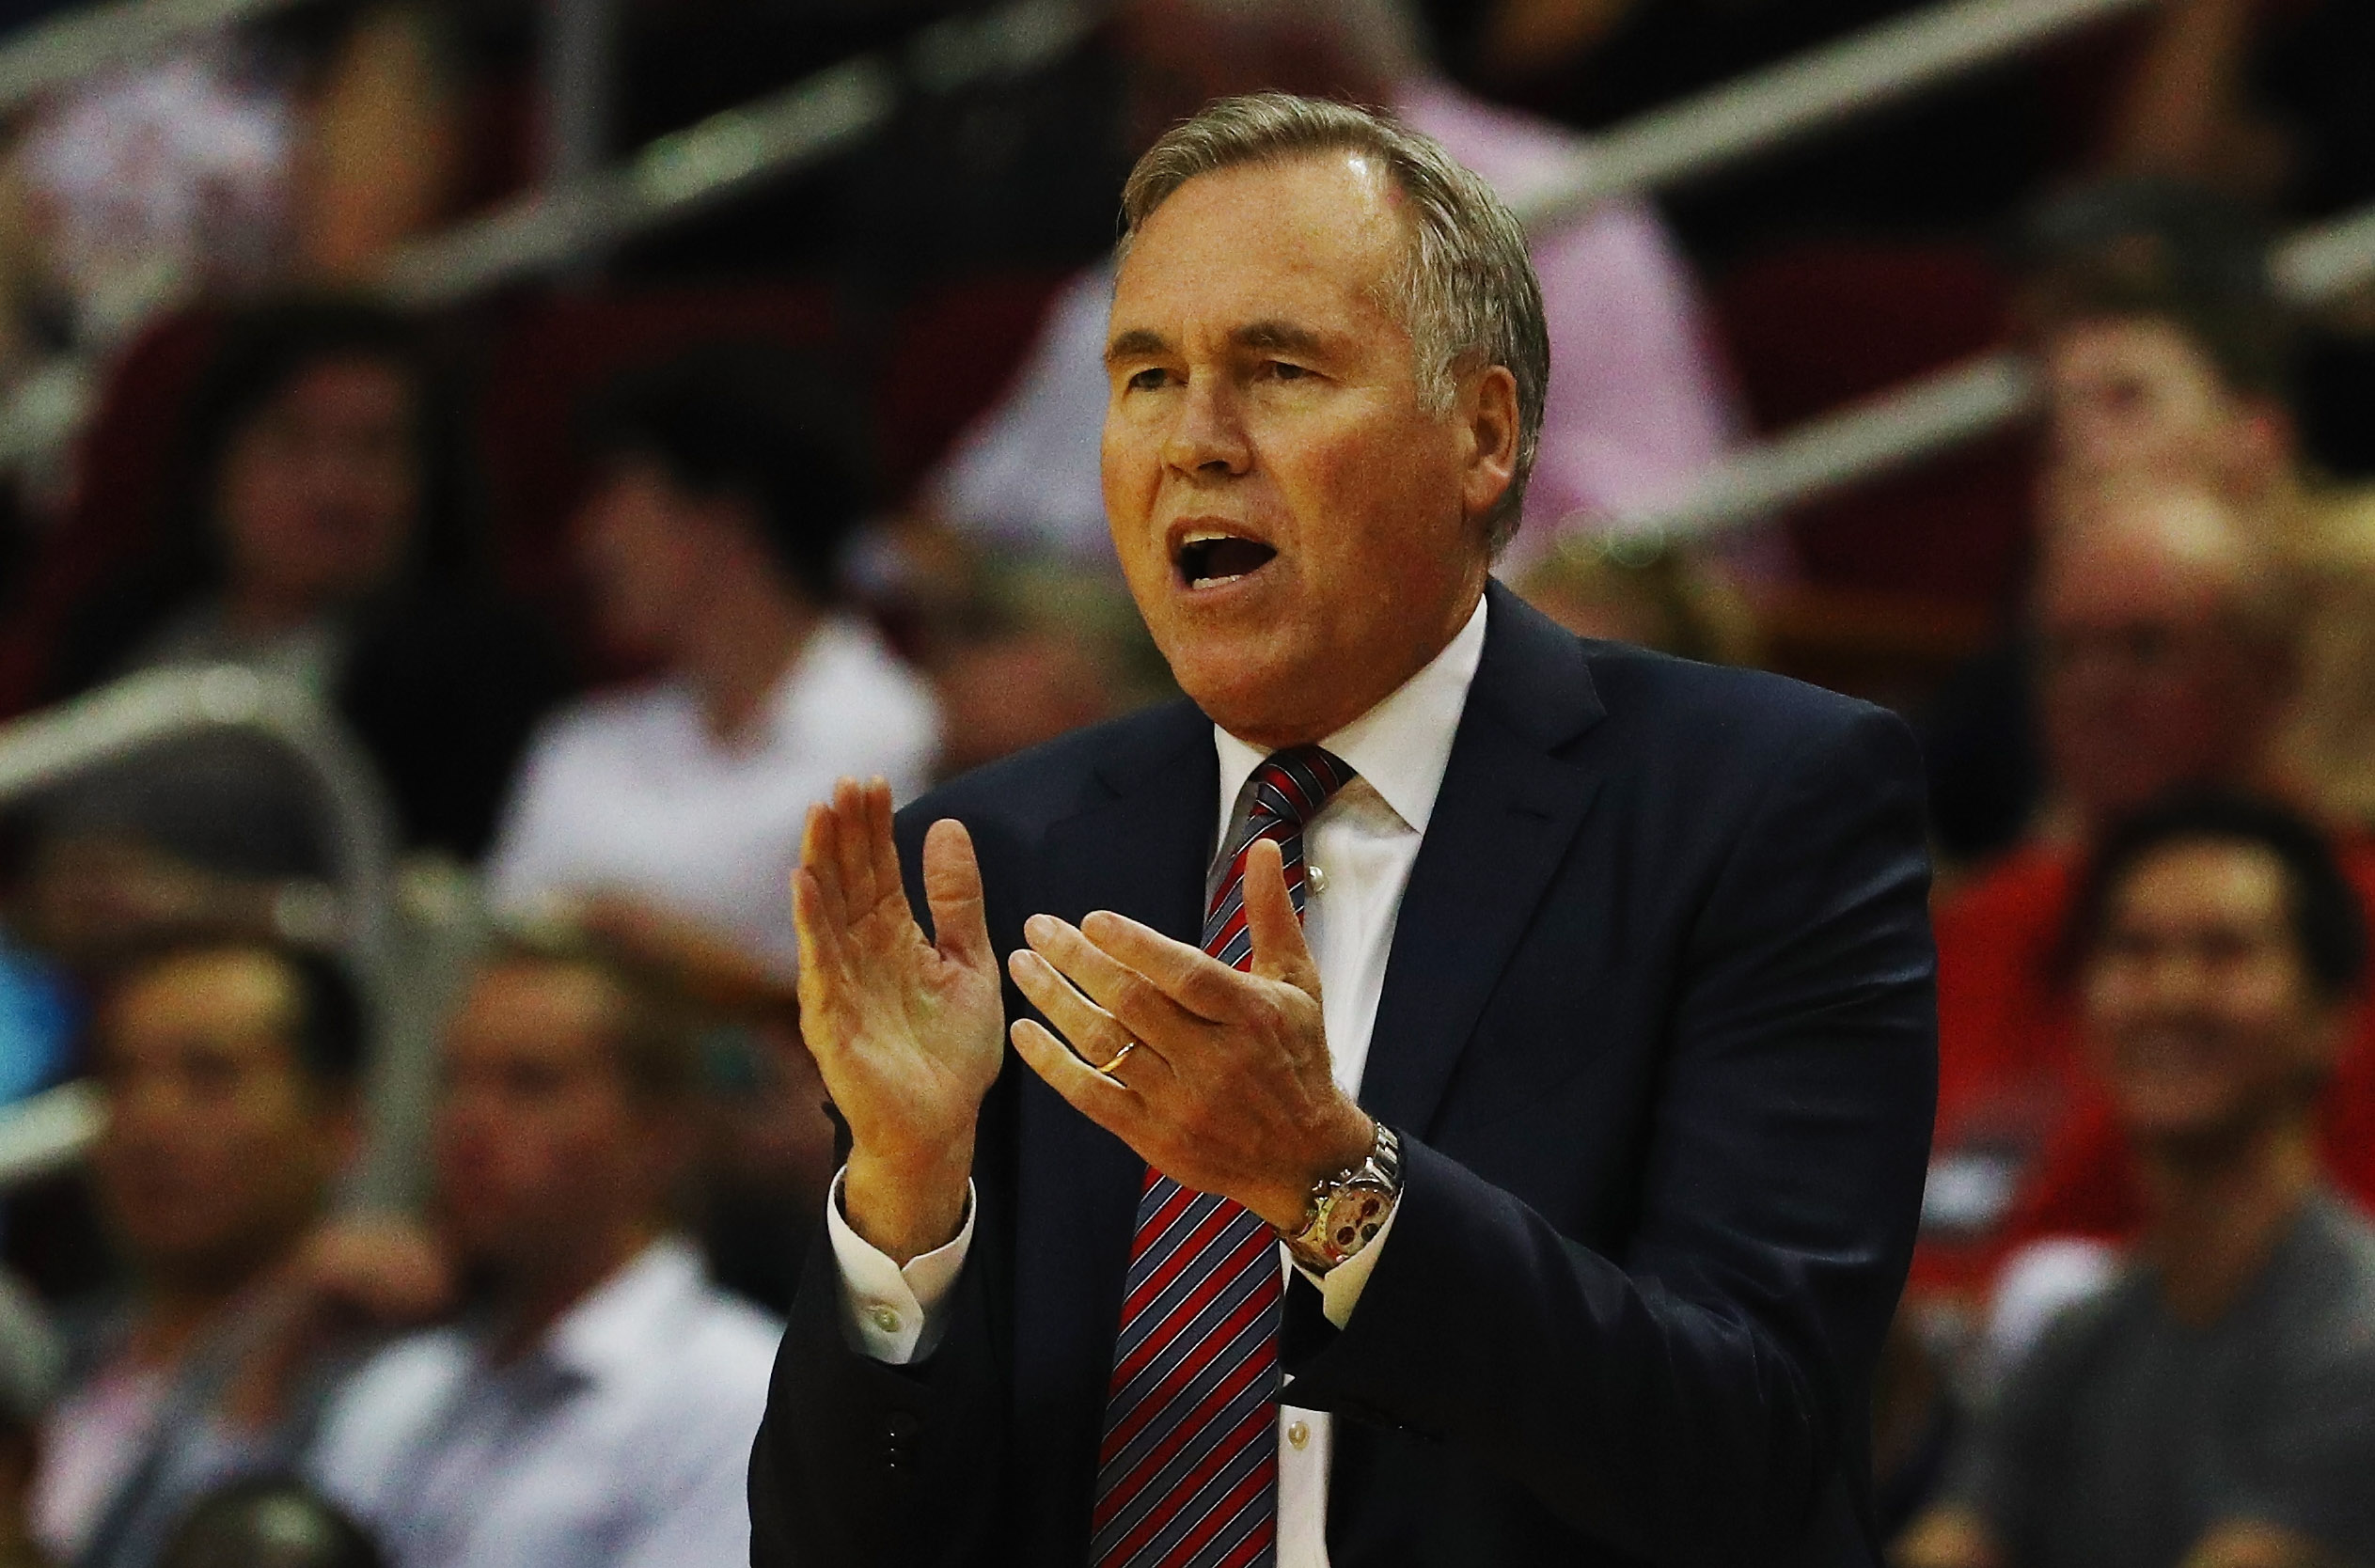 HOUSTON, TX - OCTOBER 04: Head coach Mike D'Antoni of the Houston Rockets watches the play during their game against the New York Knicks at the Toyota Center on October 4, 2016 in Houston, Texas. NOTE TO USER: User expressly acknowledges and agrees that, by downloading and or using this Photograph, user is consenting to the terms and conditions of the Getty Images License Agreement.   Scott Halleran/Getty Images/AFP